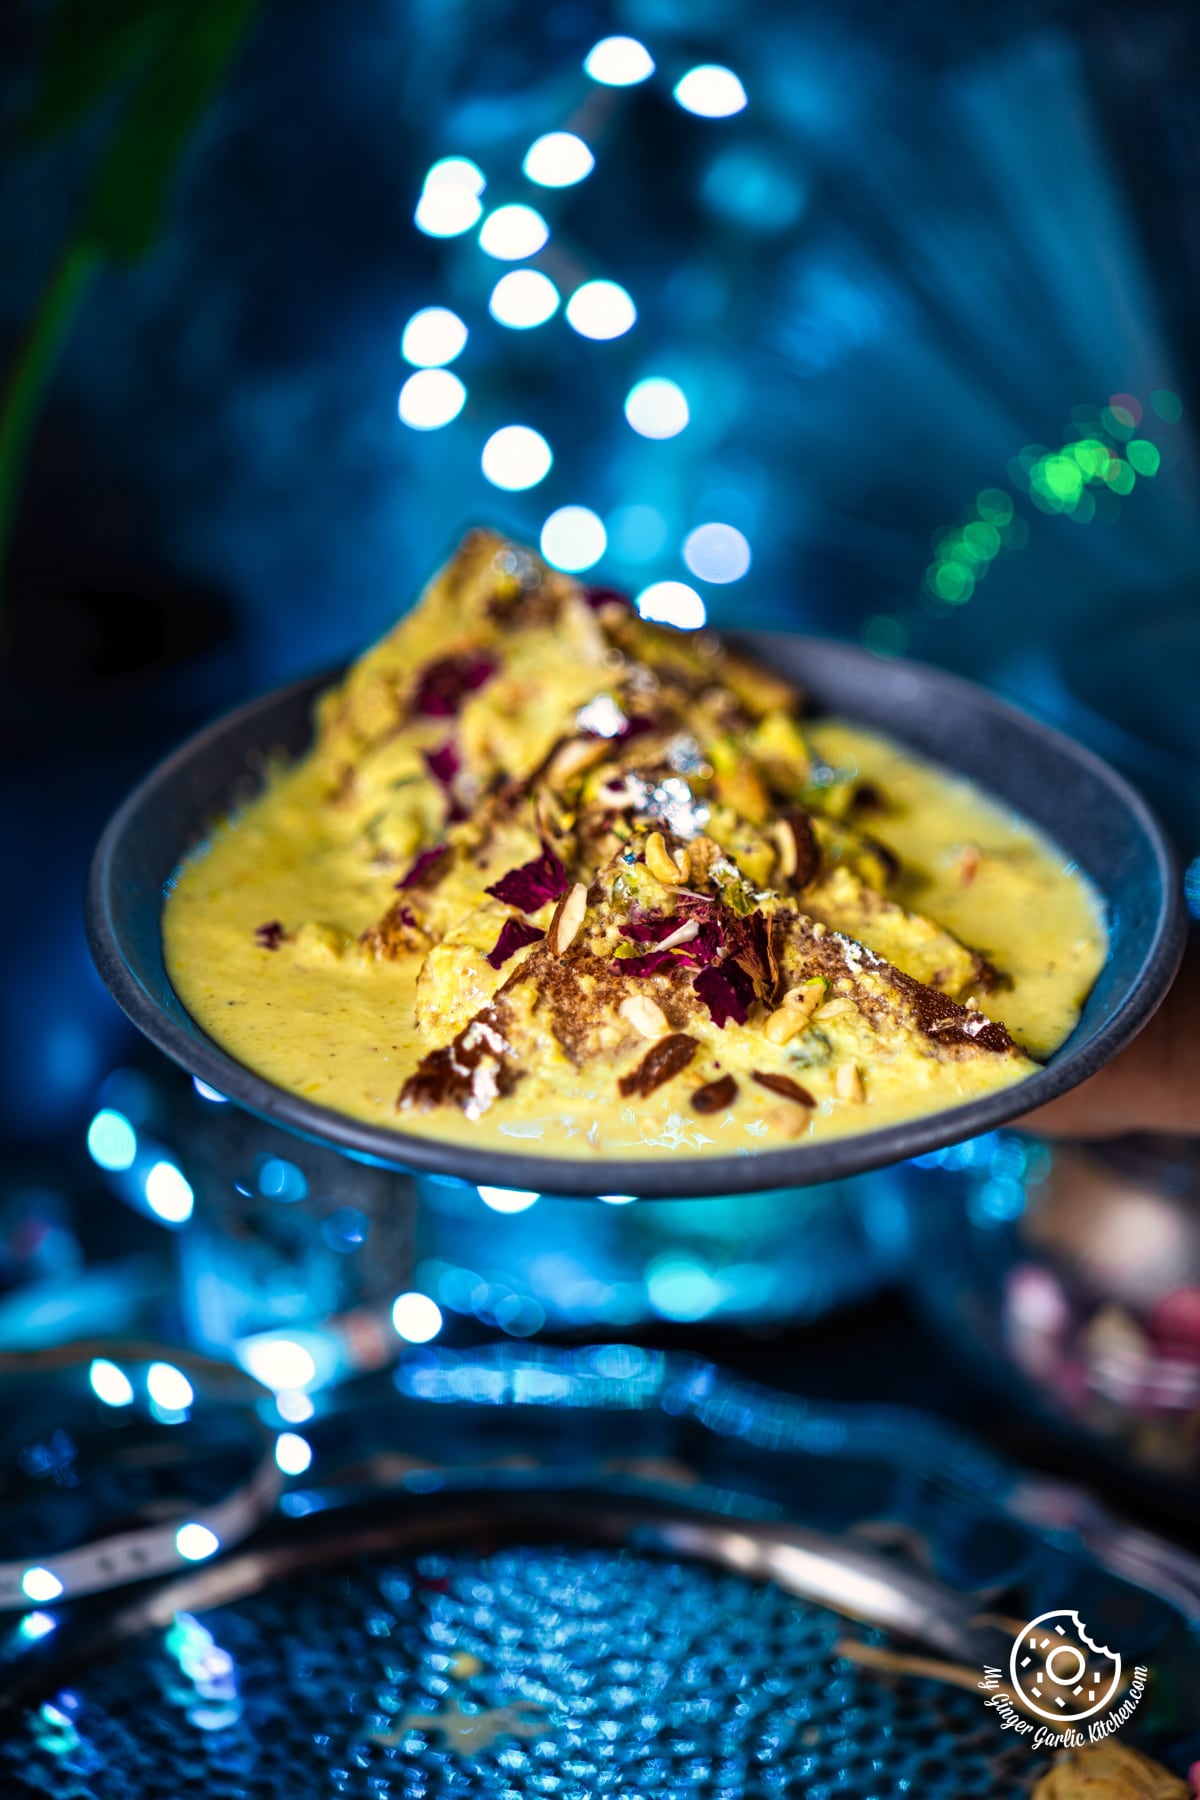 shahi tukda also known as shahi tukra served in a grey ceramic plate with blue bouquet light in the background